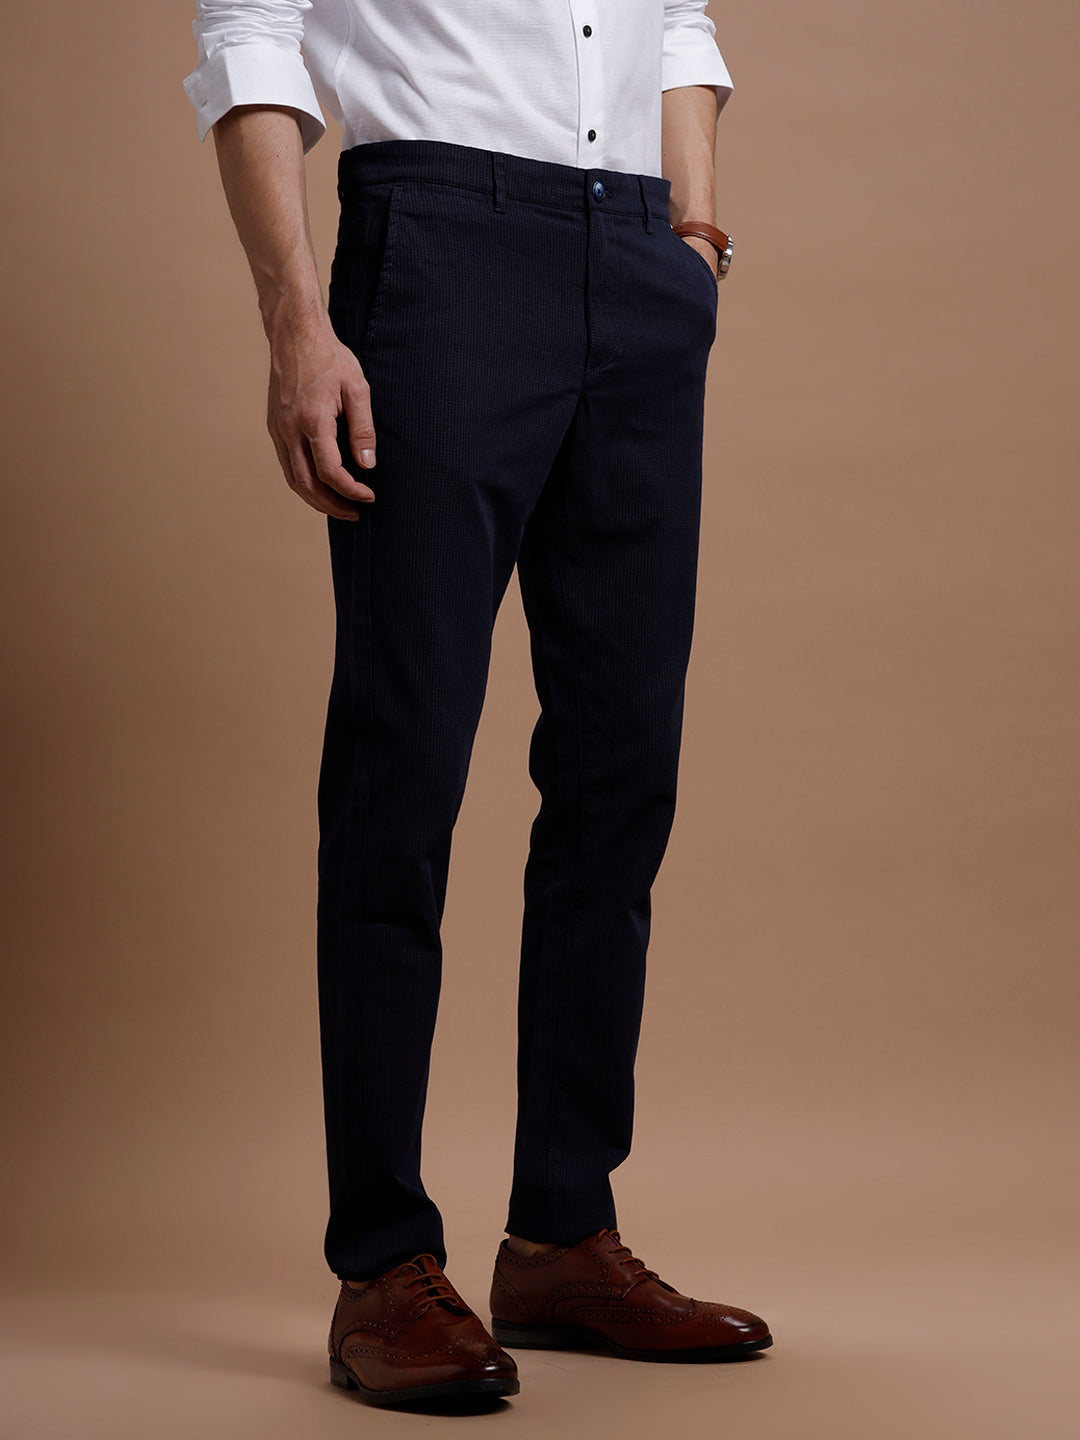 Dk Navy Smart Casual Stretch Trouser